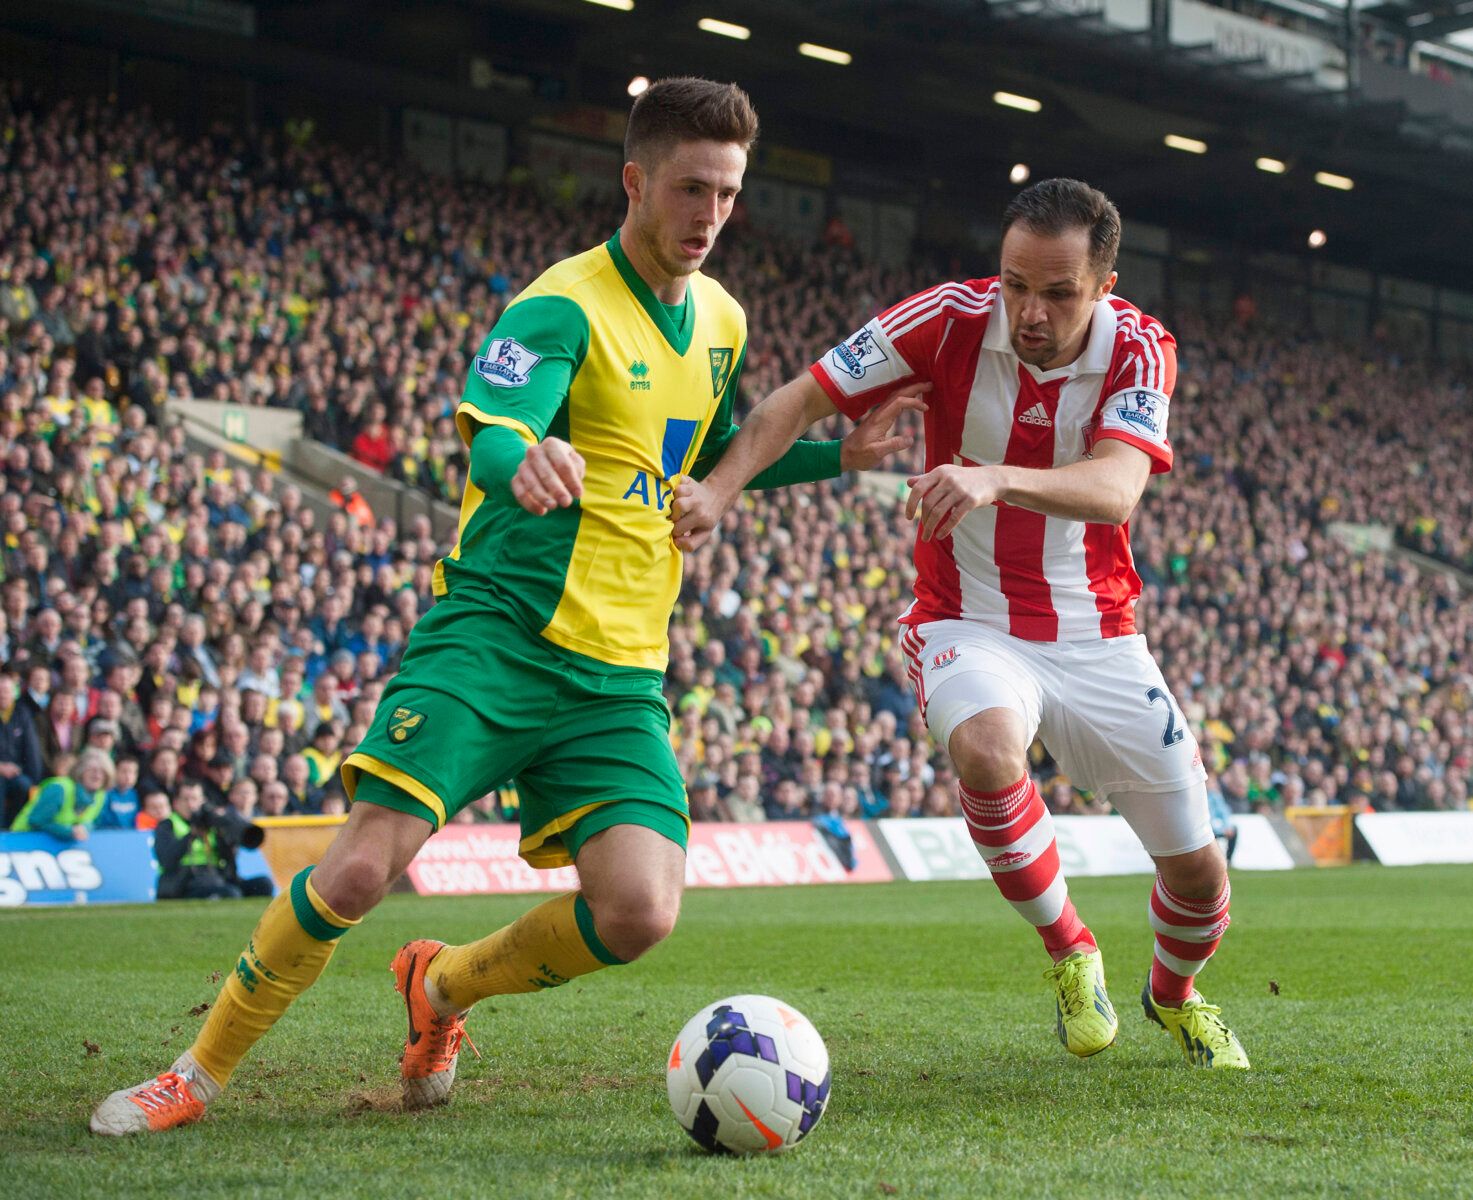 Football - Norwich City v Stoke City - Barclays Premier League - Carrow Road - 8/3/14 
Norwich's Ricky Van Wolfswinkel in action with Stoke's Matthew Etherington   
Mandatory Credit: Action Images / Alan Walter 
Livepic 
EDITORIAL USE ONLY. No use with unauthorized audio, video, data, fixture lists, club/league logos or 